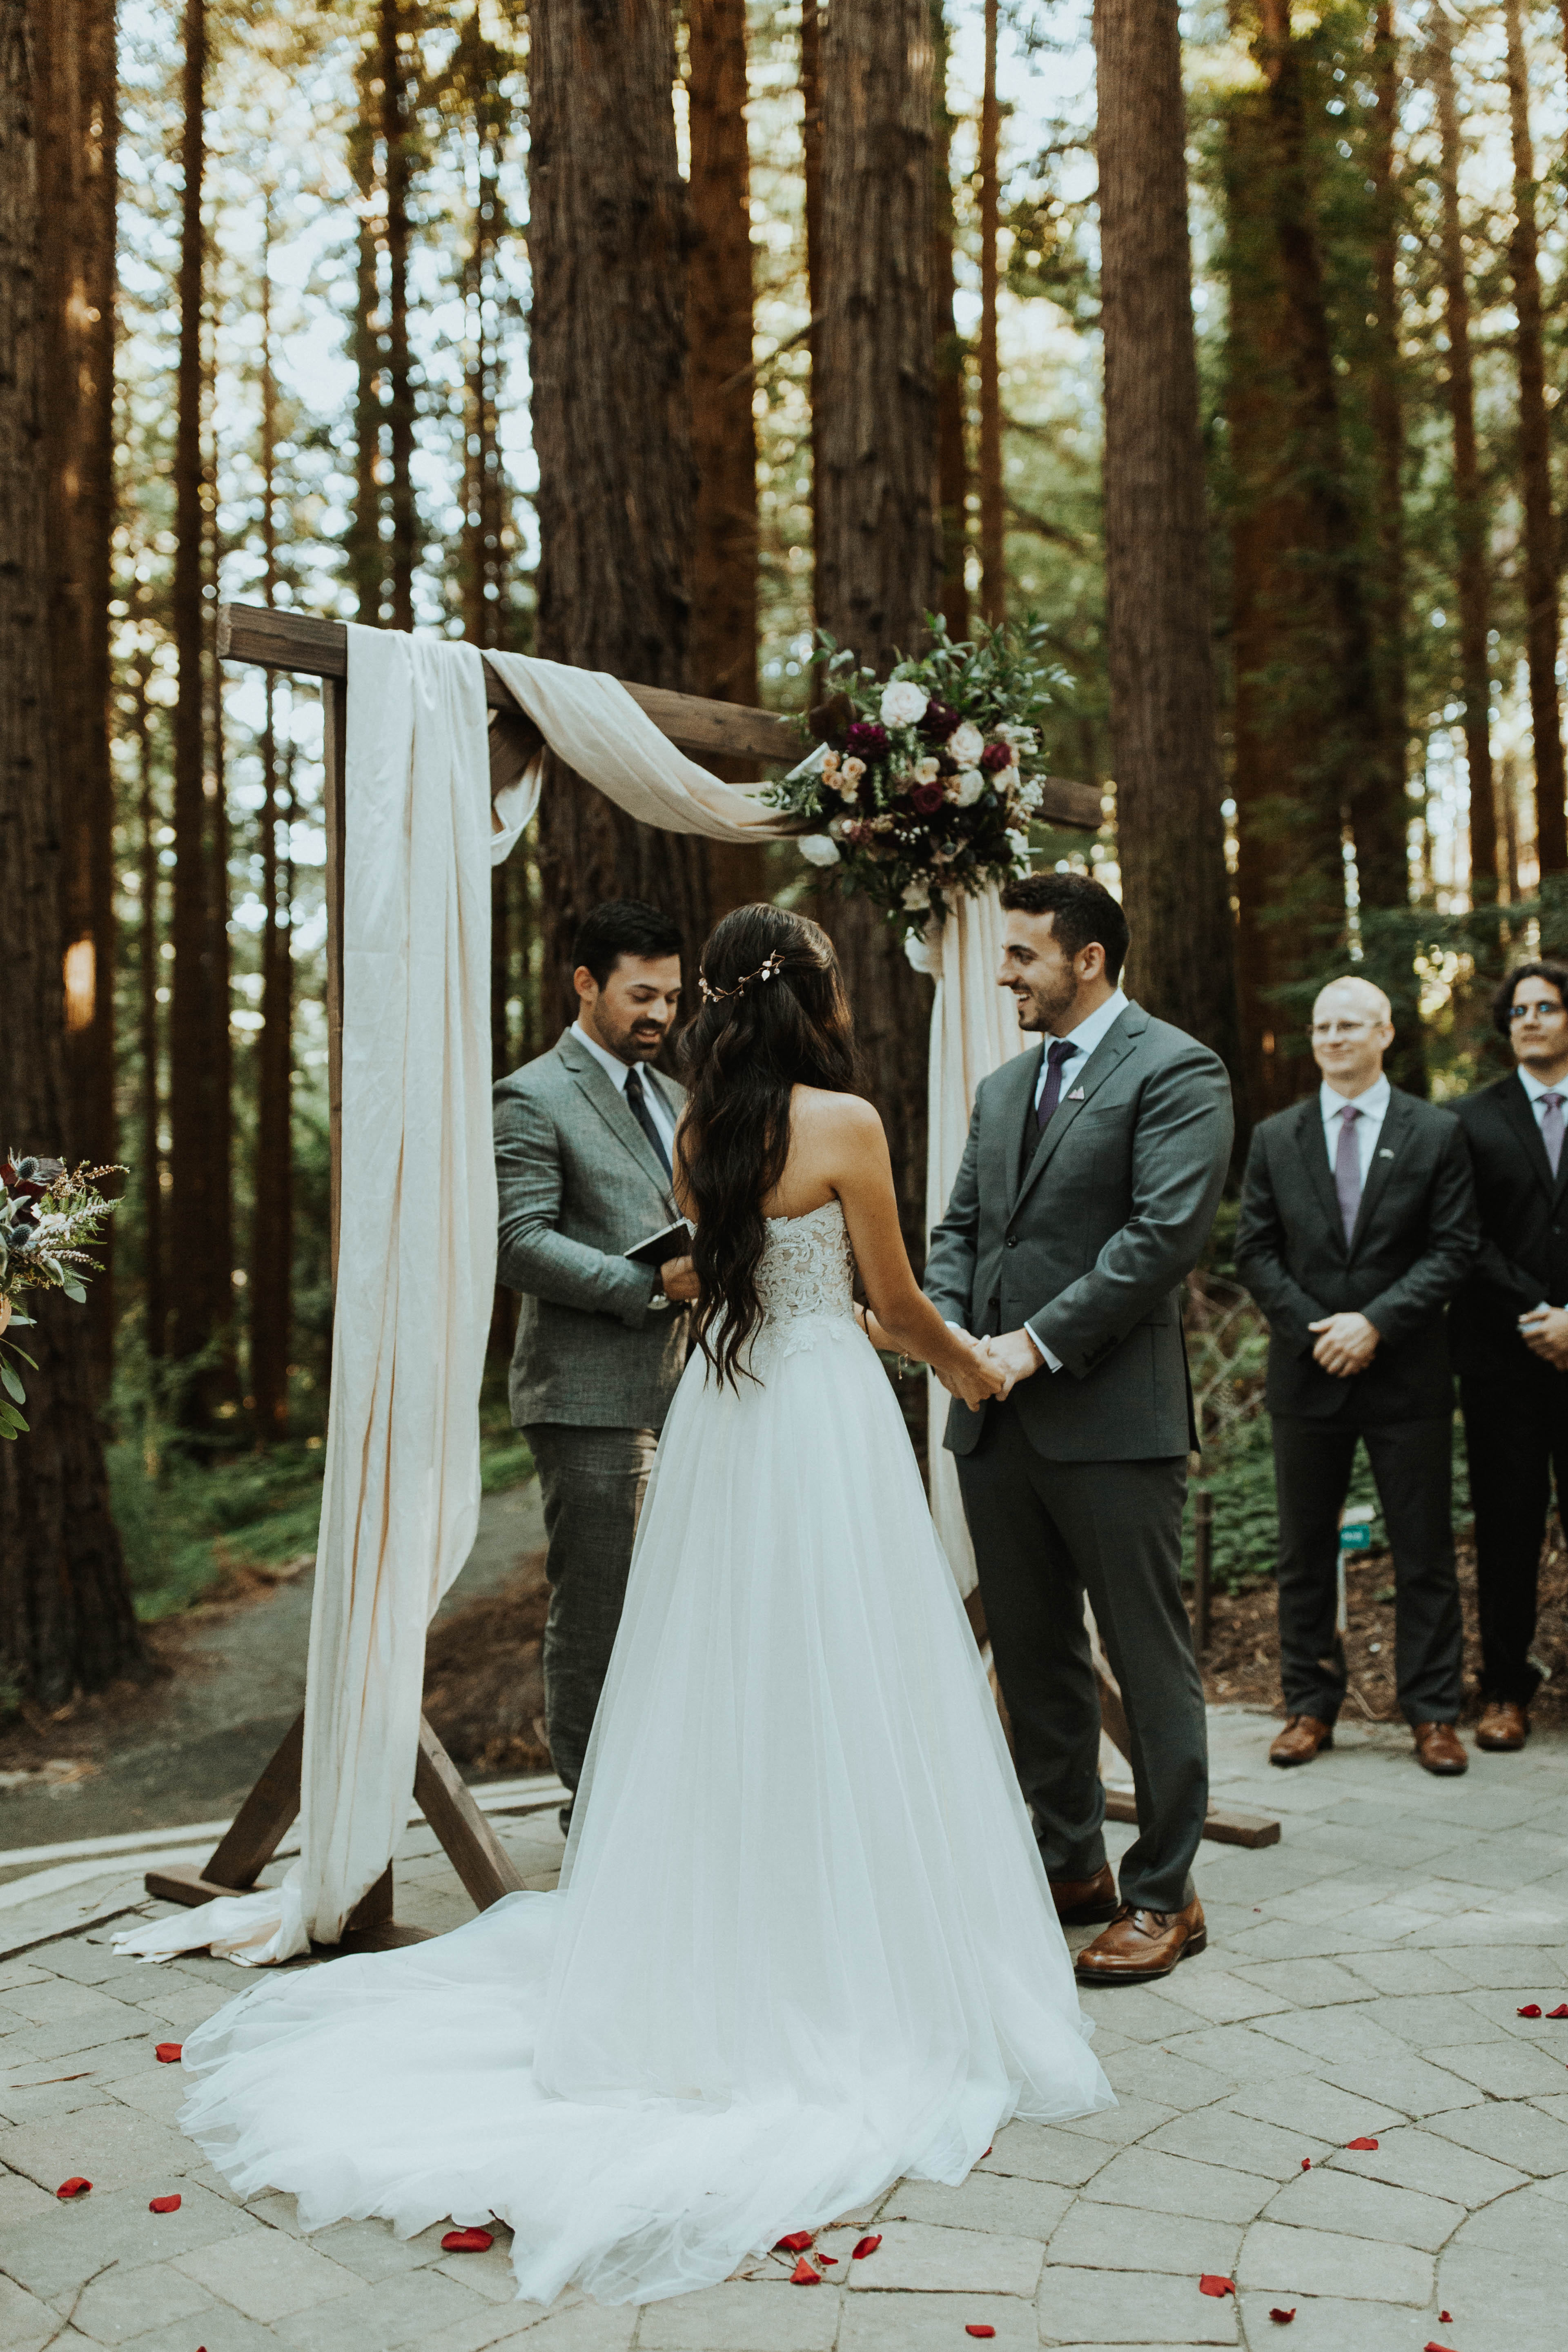 Wedding ceremony in a redwood forest